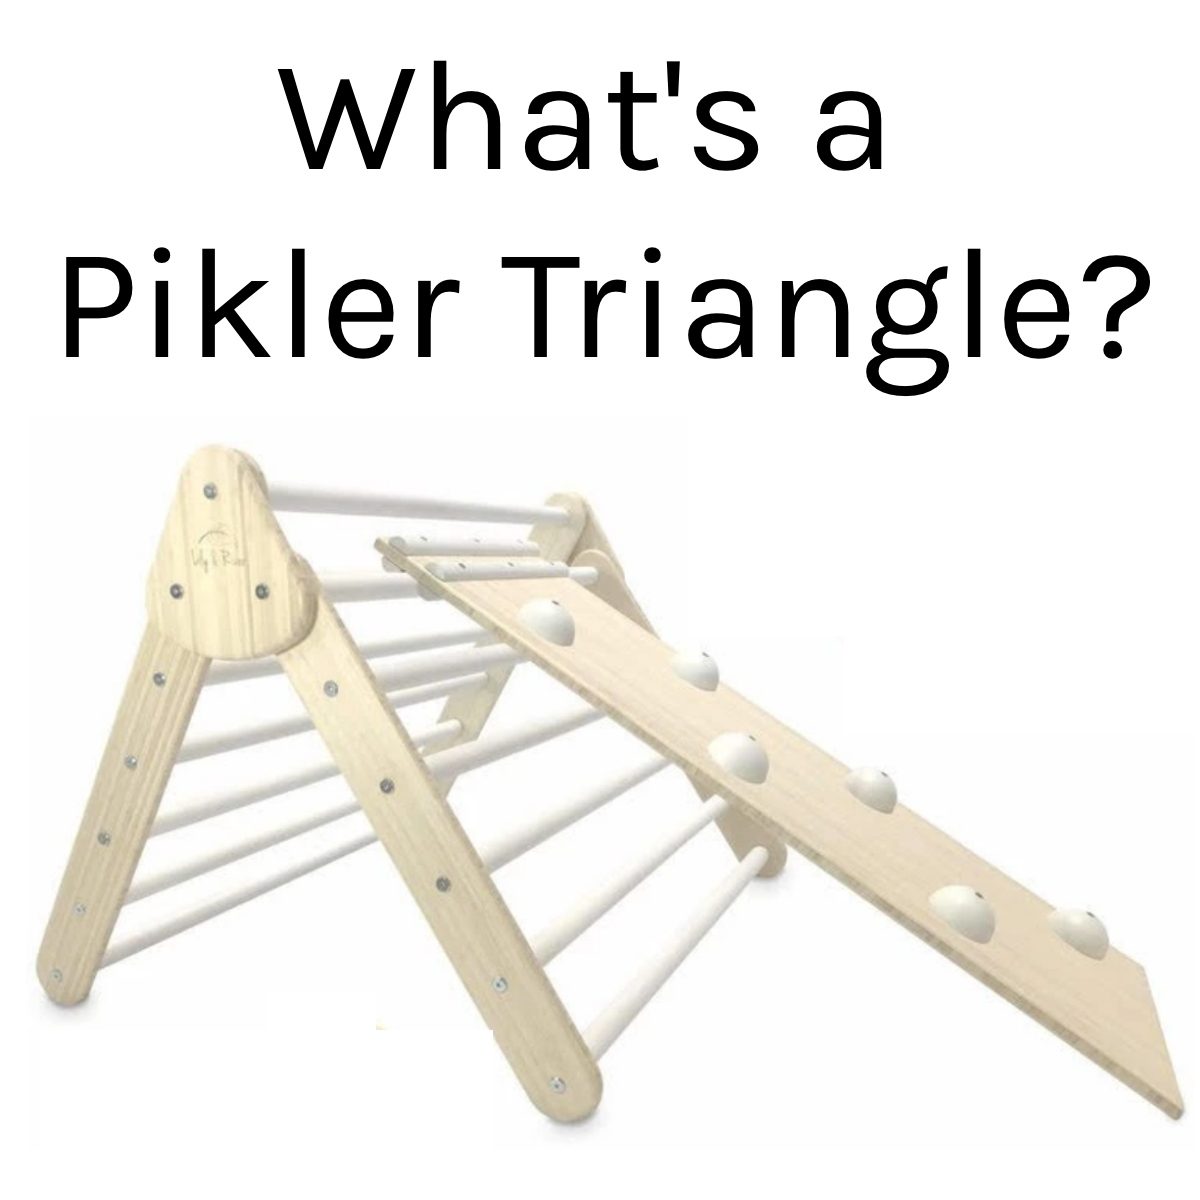 What's a Pikler Triangle?